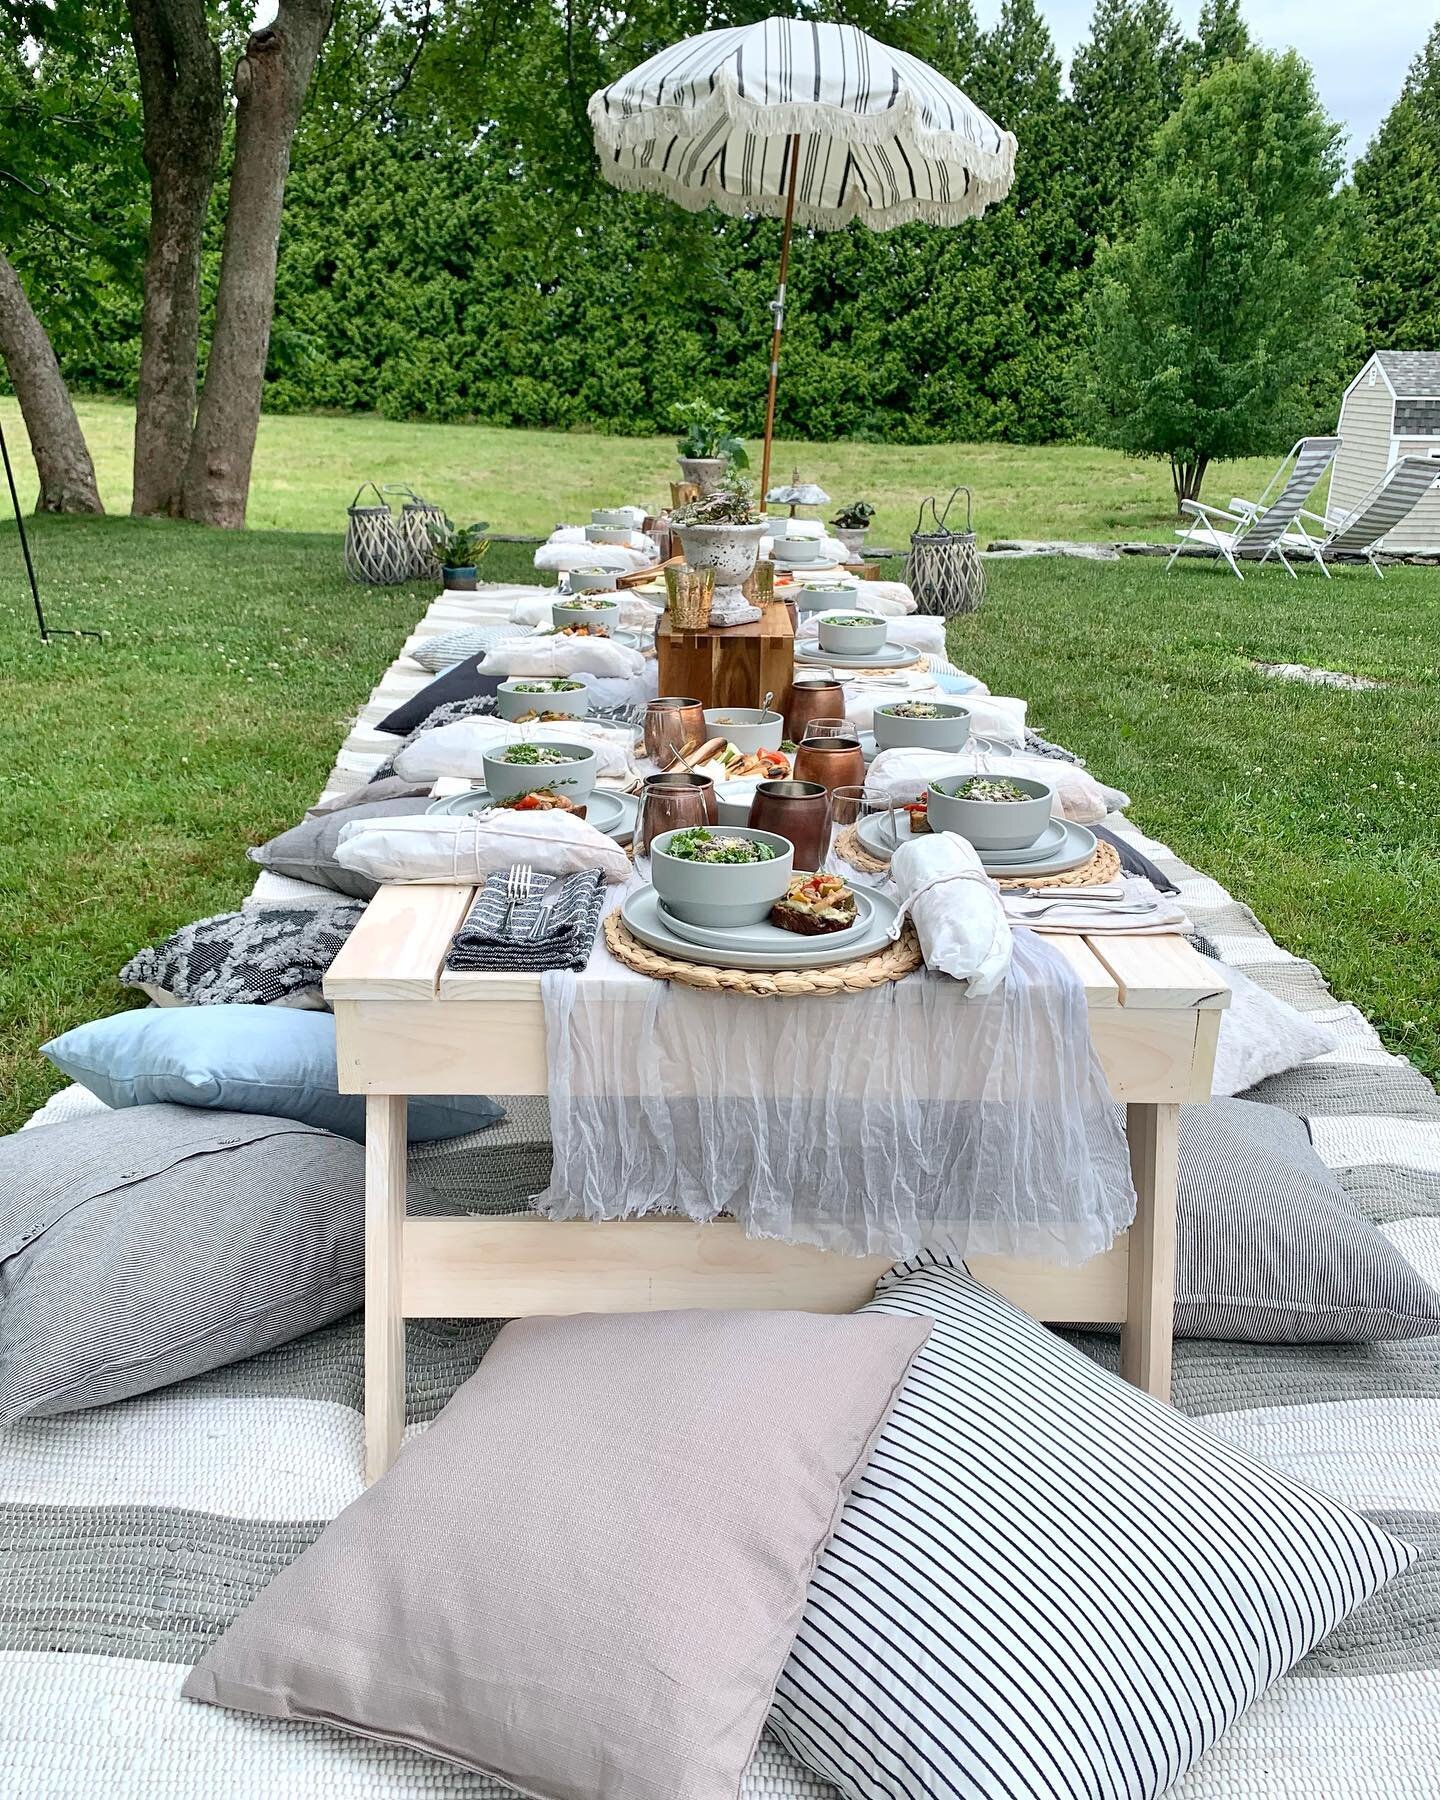 Did you know that we can set up a picnic in the comfort of your own backyard? Check out this beautiful picnic for 14 guests at a private residence in Little Compton.
#stoneacre #littlecomptonri #rhodeisland #theclassiccoast